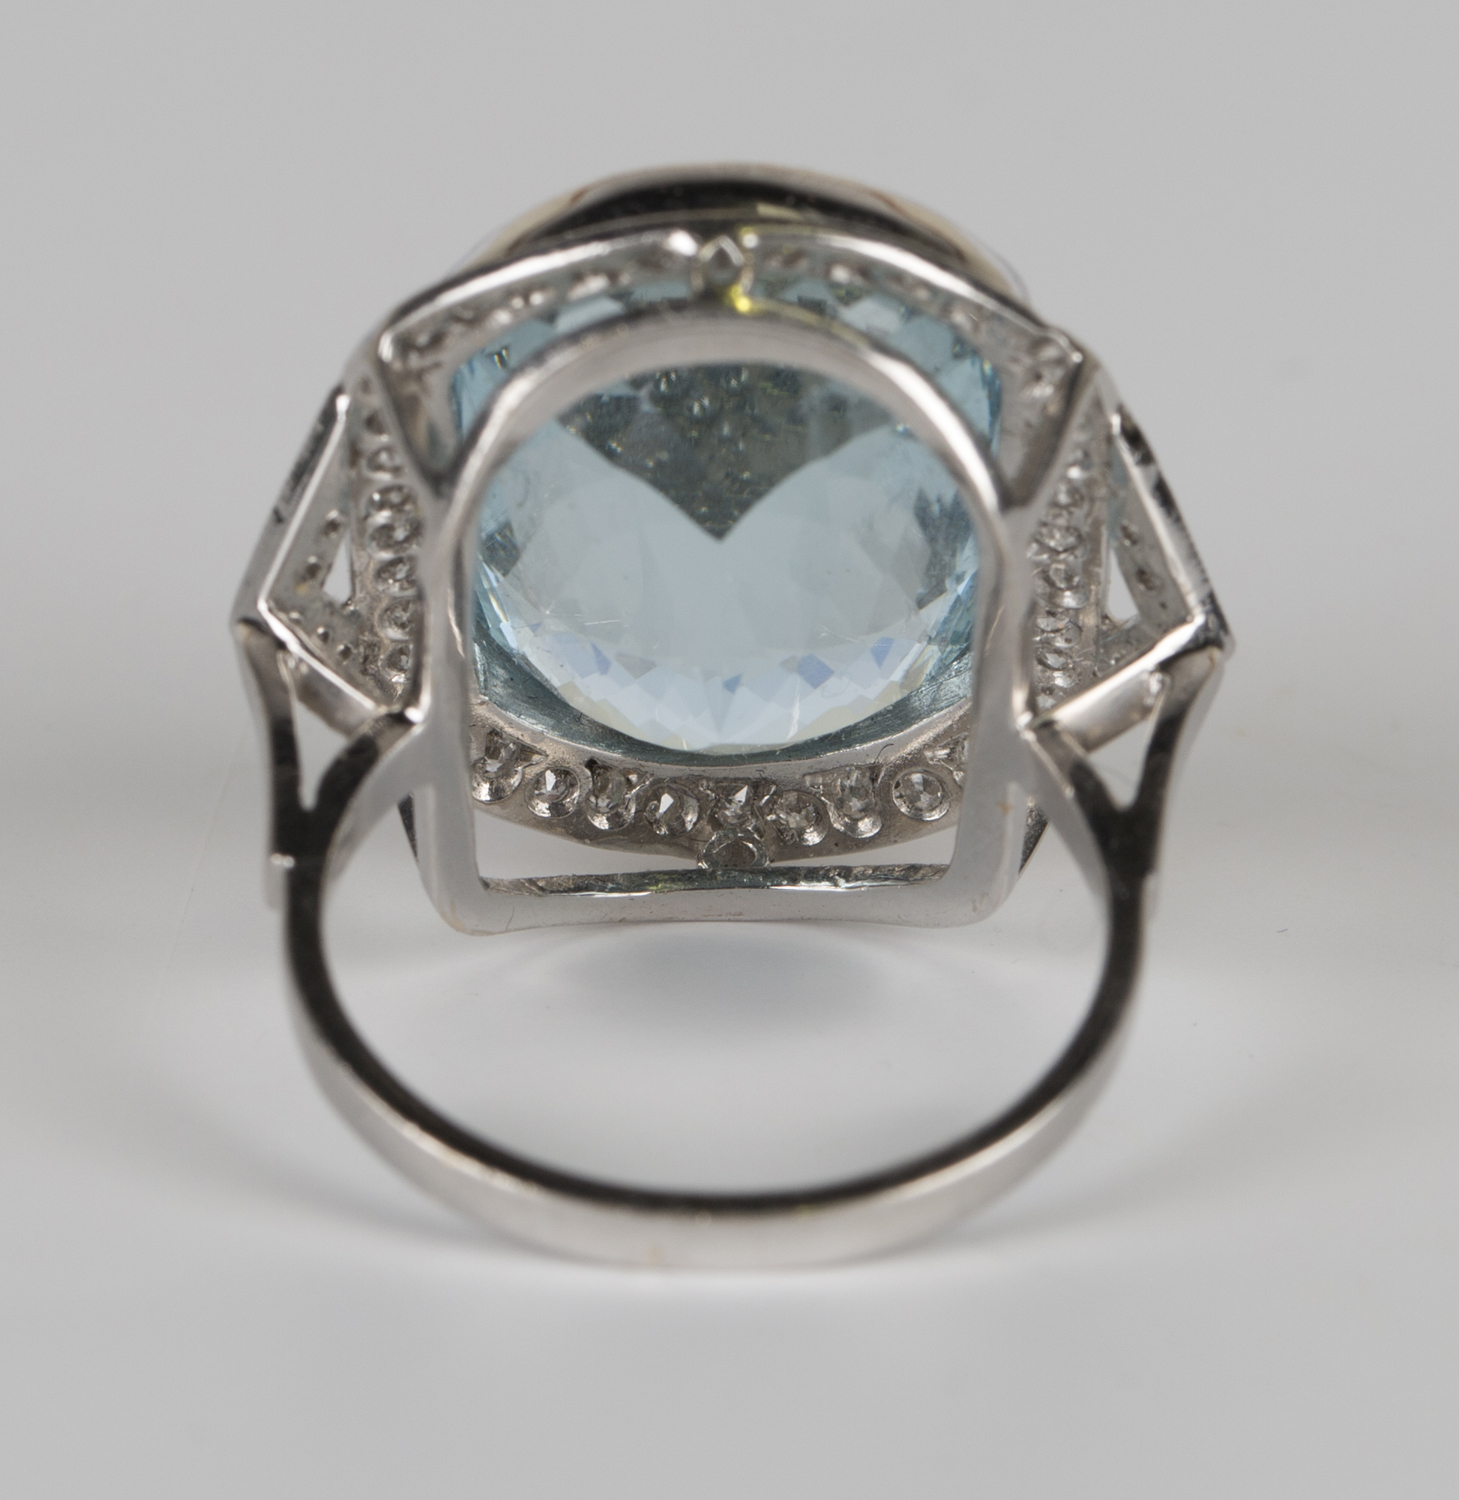 An 18ct white gold, aquamarine and diamond ring, collet set with a large oval cut aquamarine - Image 2 of 2